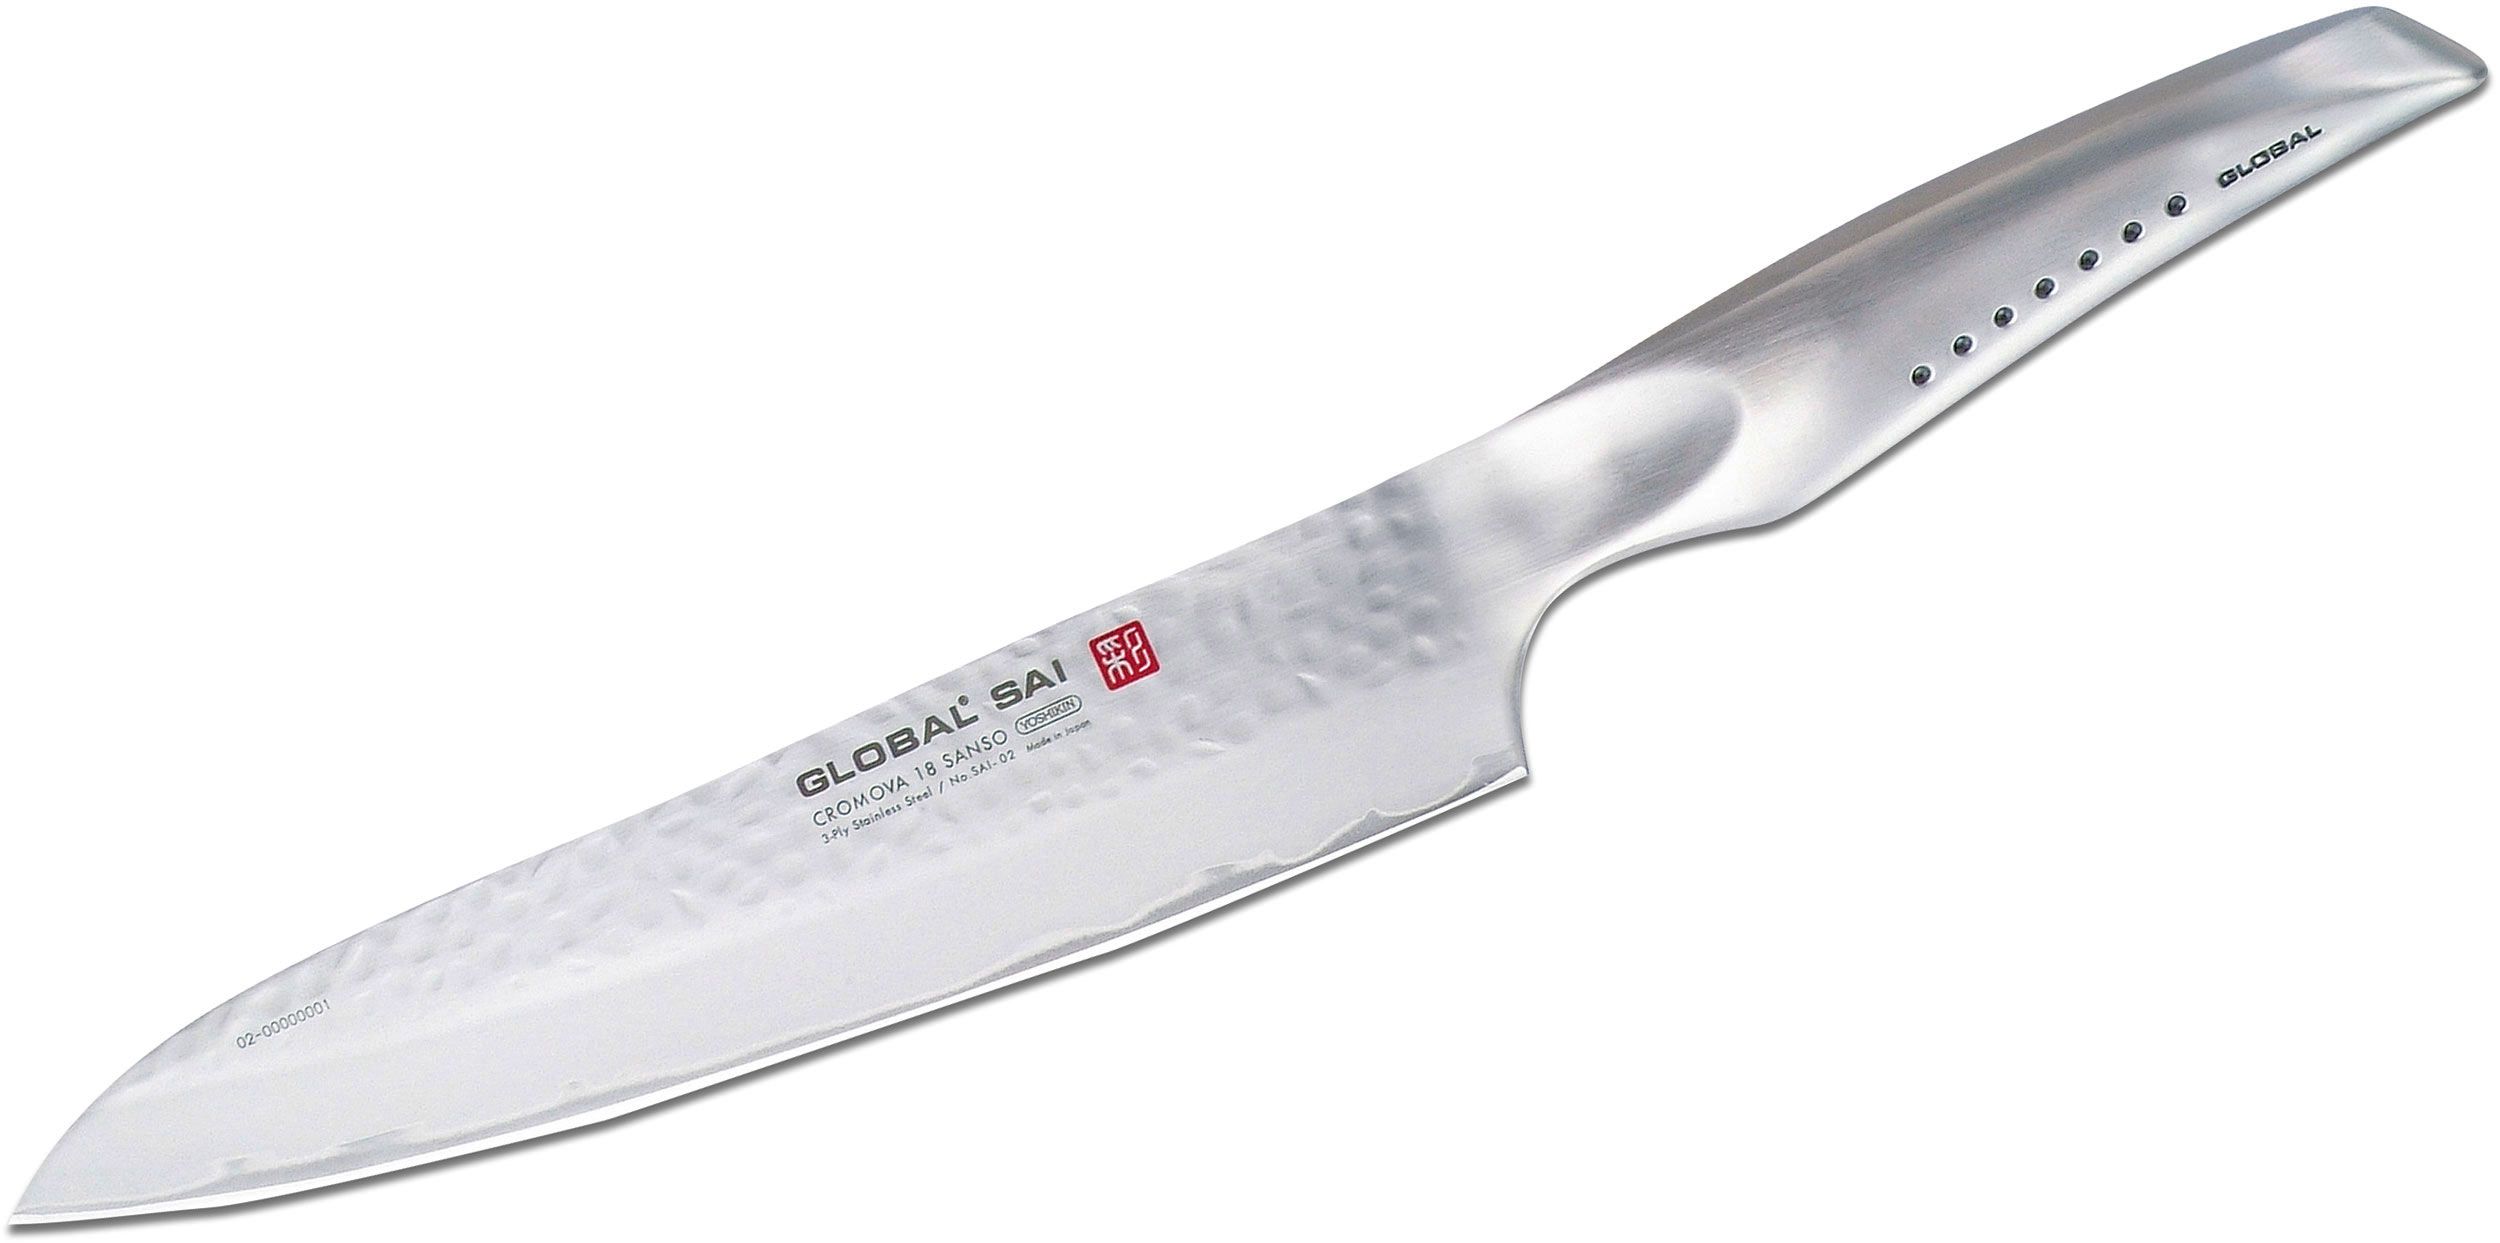 Global SAI-02 Chef's / Carving 8" Hammered Blade - KnifeCenter